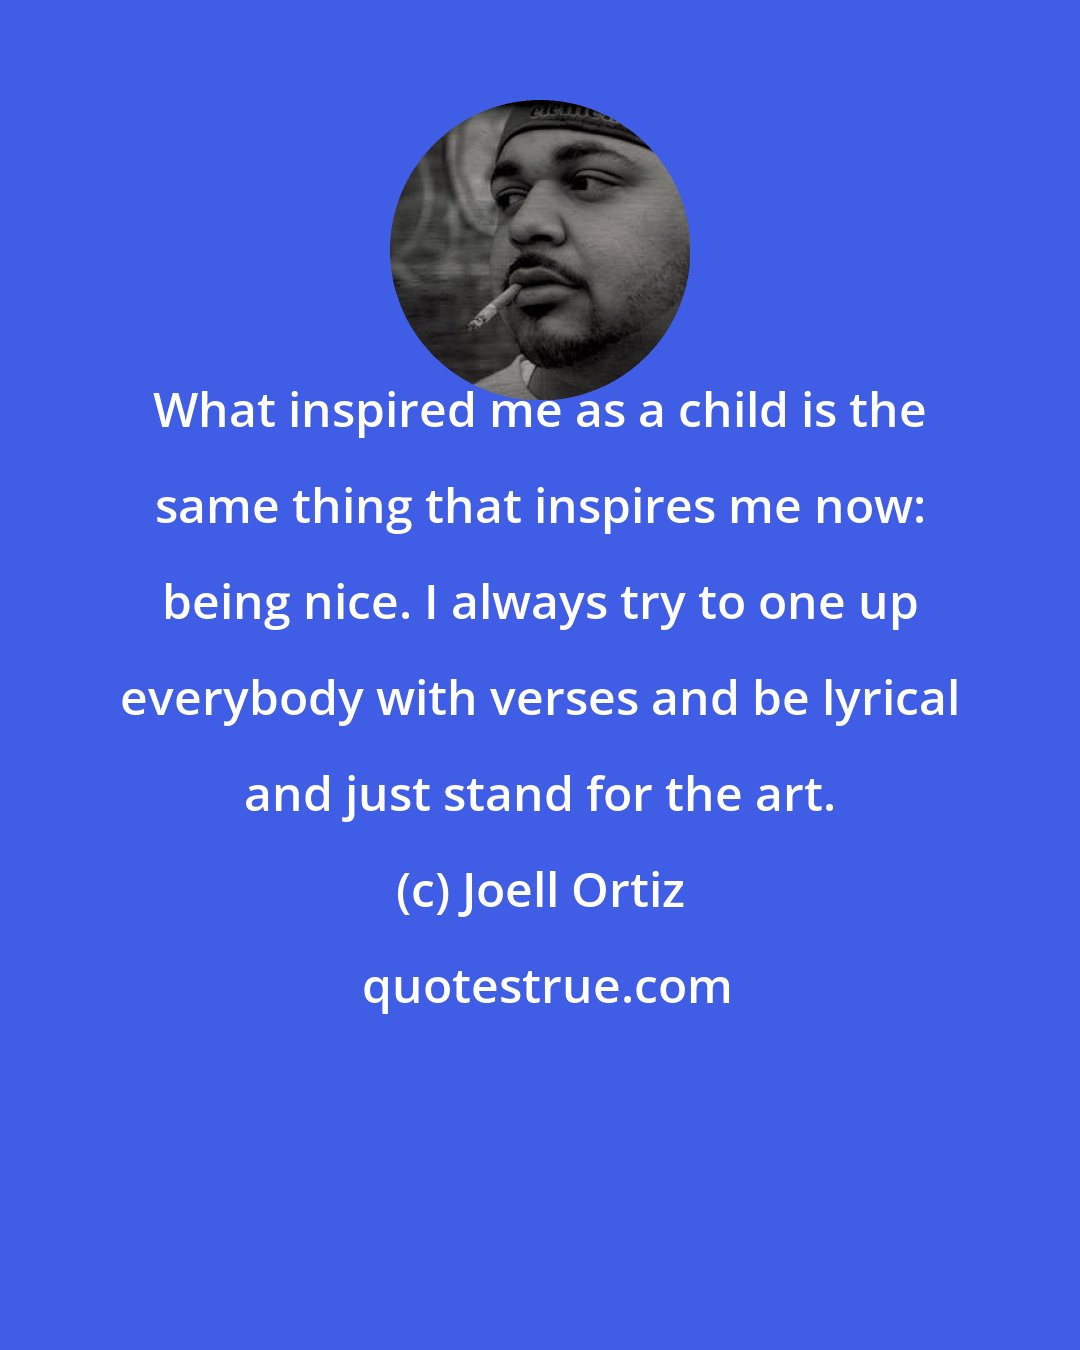 Joell Ortiz: What inspired me as a child is the same thing that inspires me now: being nice. I always try to one up everybody with verses and be lyrical and just stand for the art.